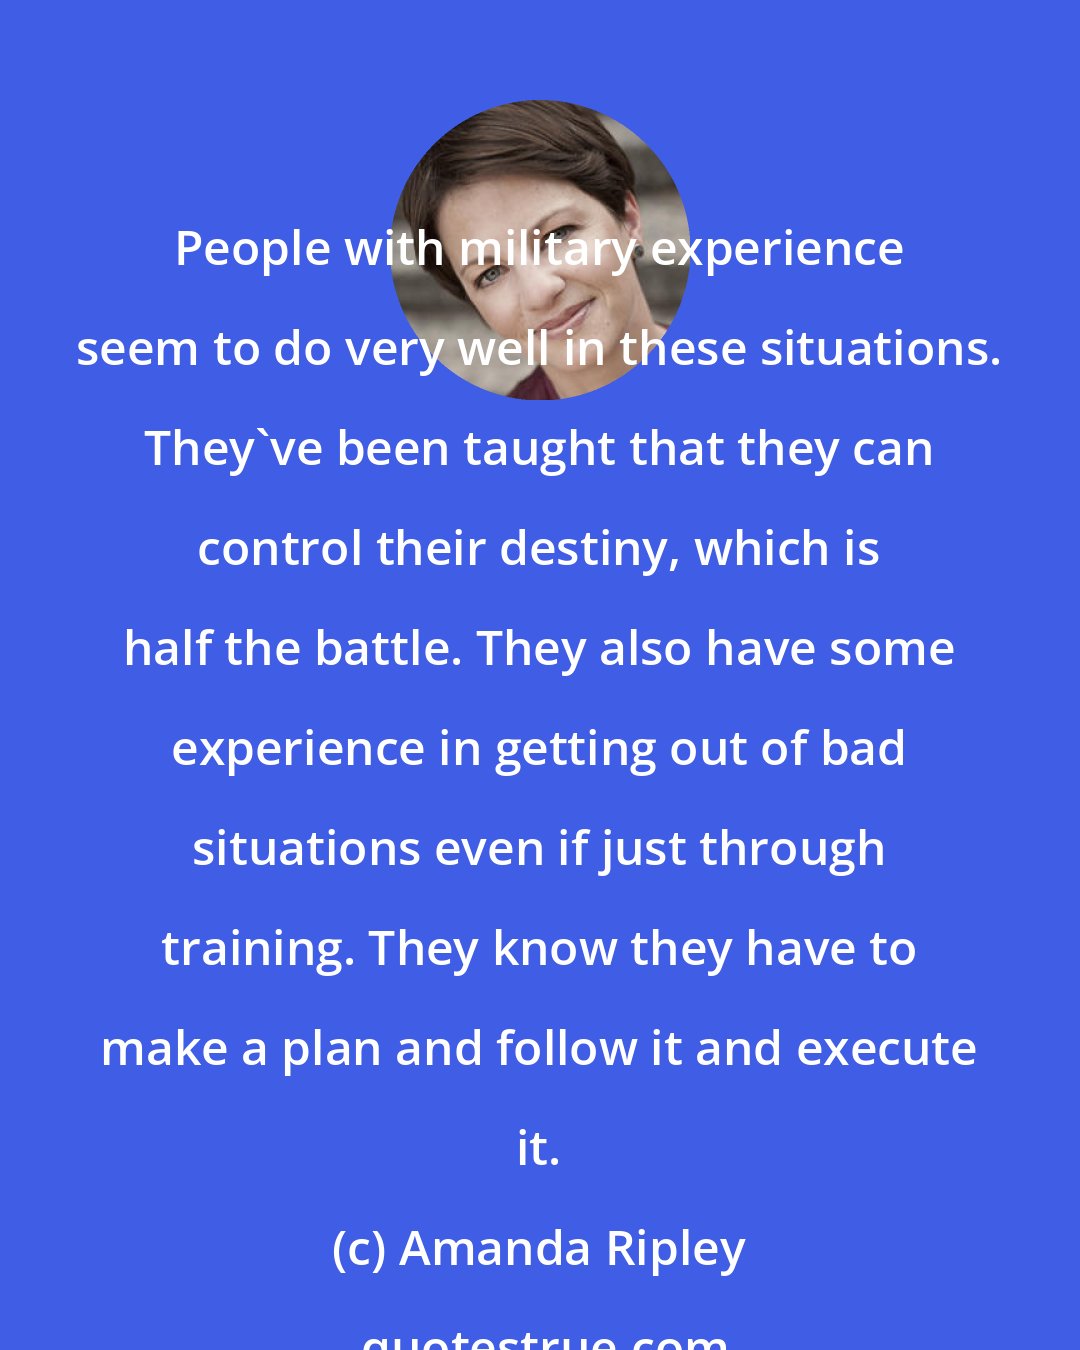 Amanda Ripley: People with military experience seem to do very well in these situations. They've been taught that they can control their destiny, which is half the battle. They also have some experience in getting out of bad situations even if just through training. They know they have to make a plan and follow it and execute it.